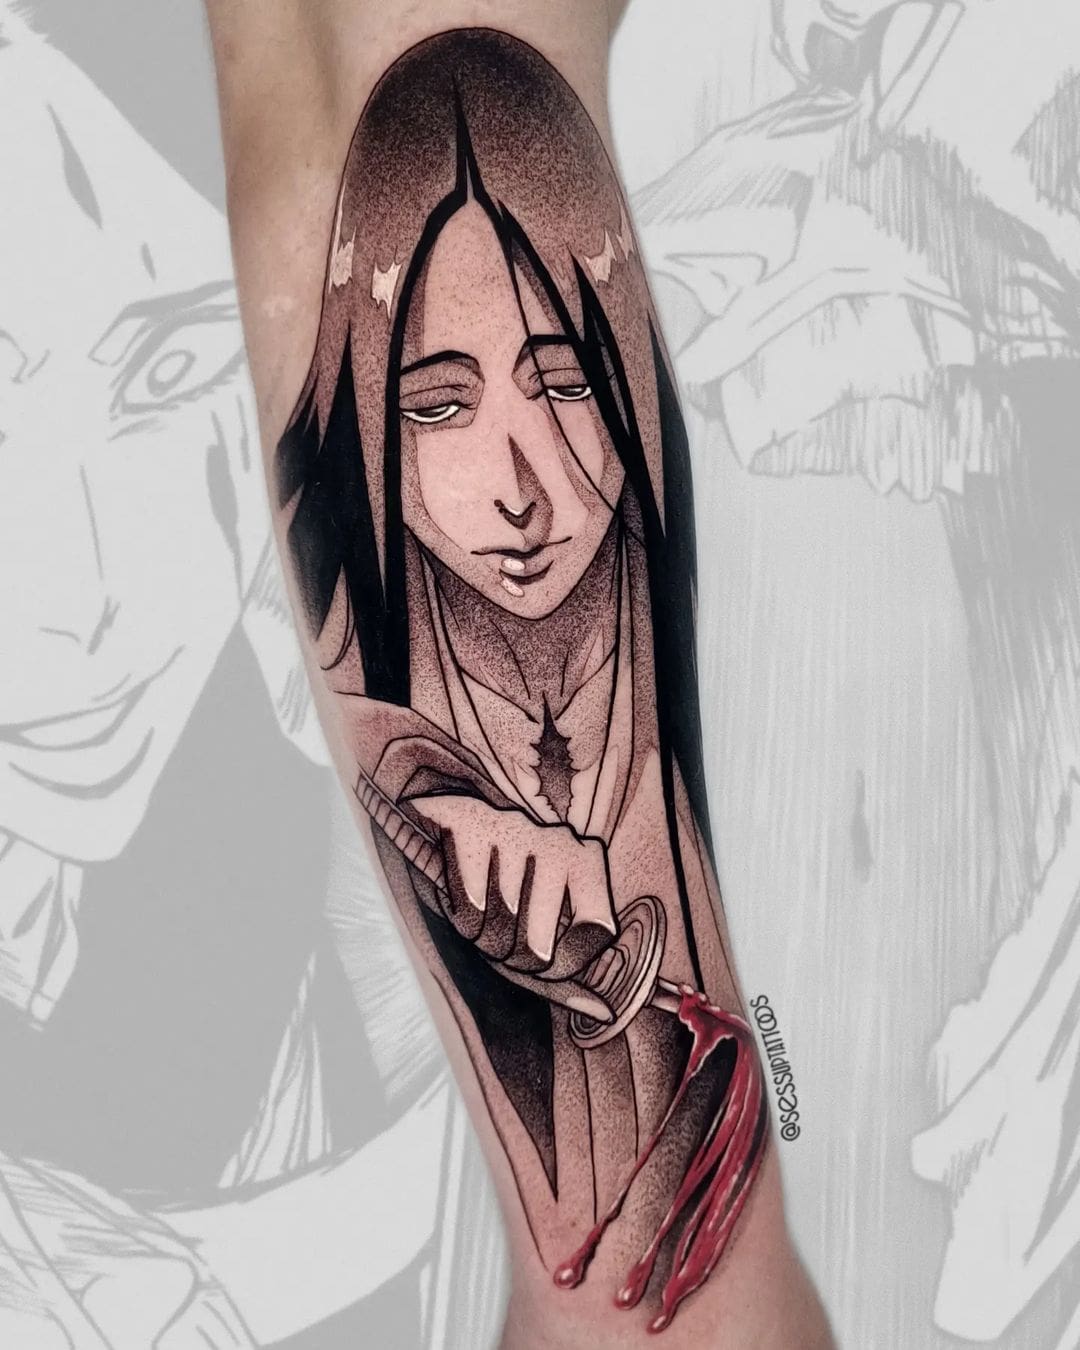 Lizard's Skin Tattoos - Naruto is one of the best mangas there ever is, the  character that is the most prominent and menacing was Itachi Uchiha. Anime  fandom is something that we